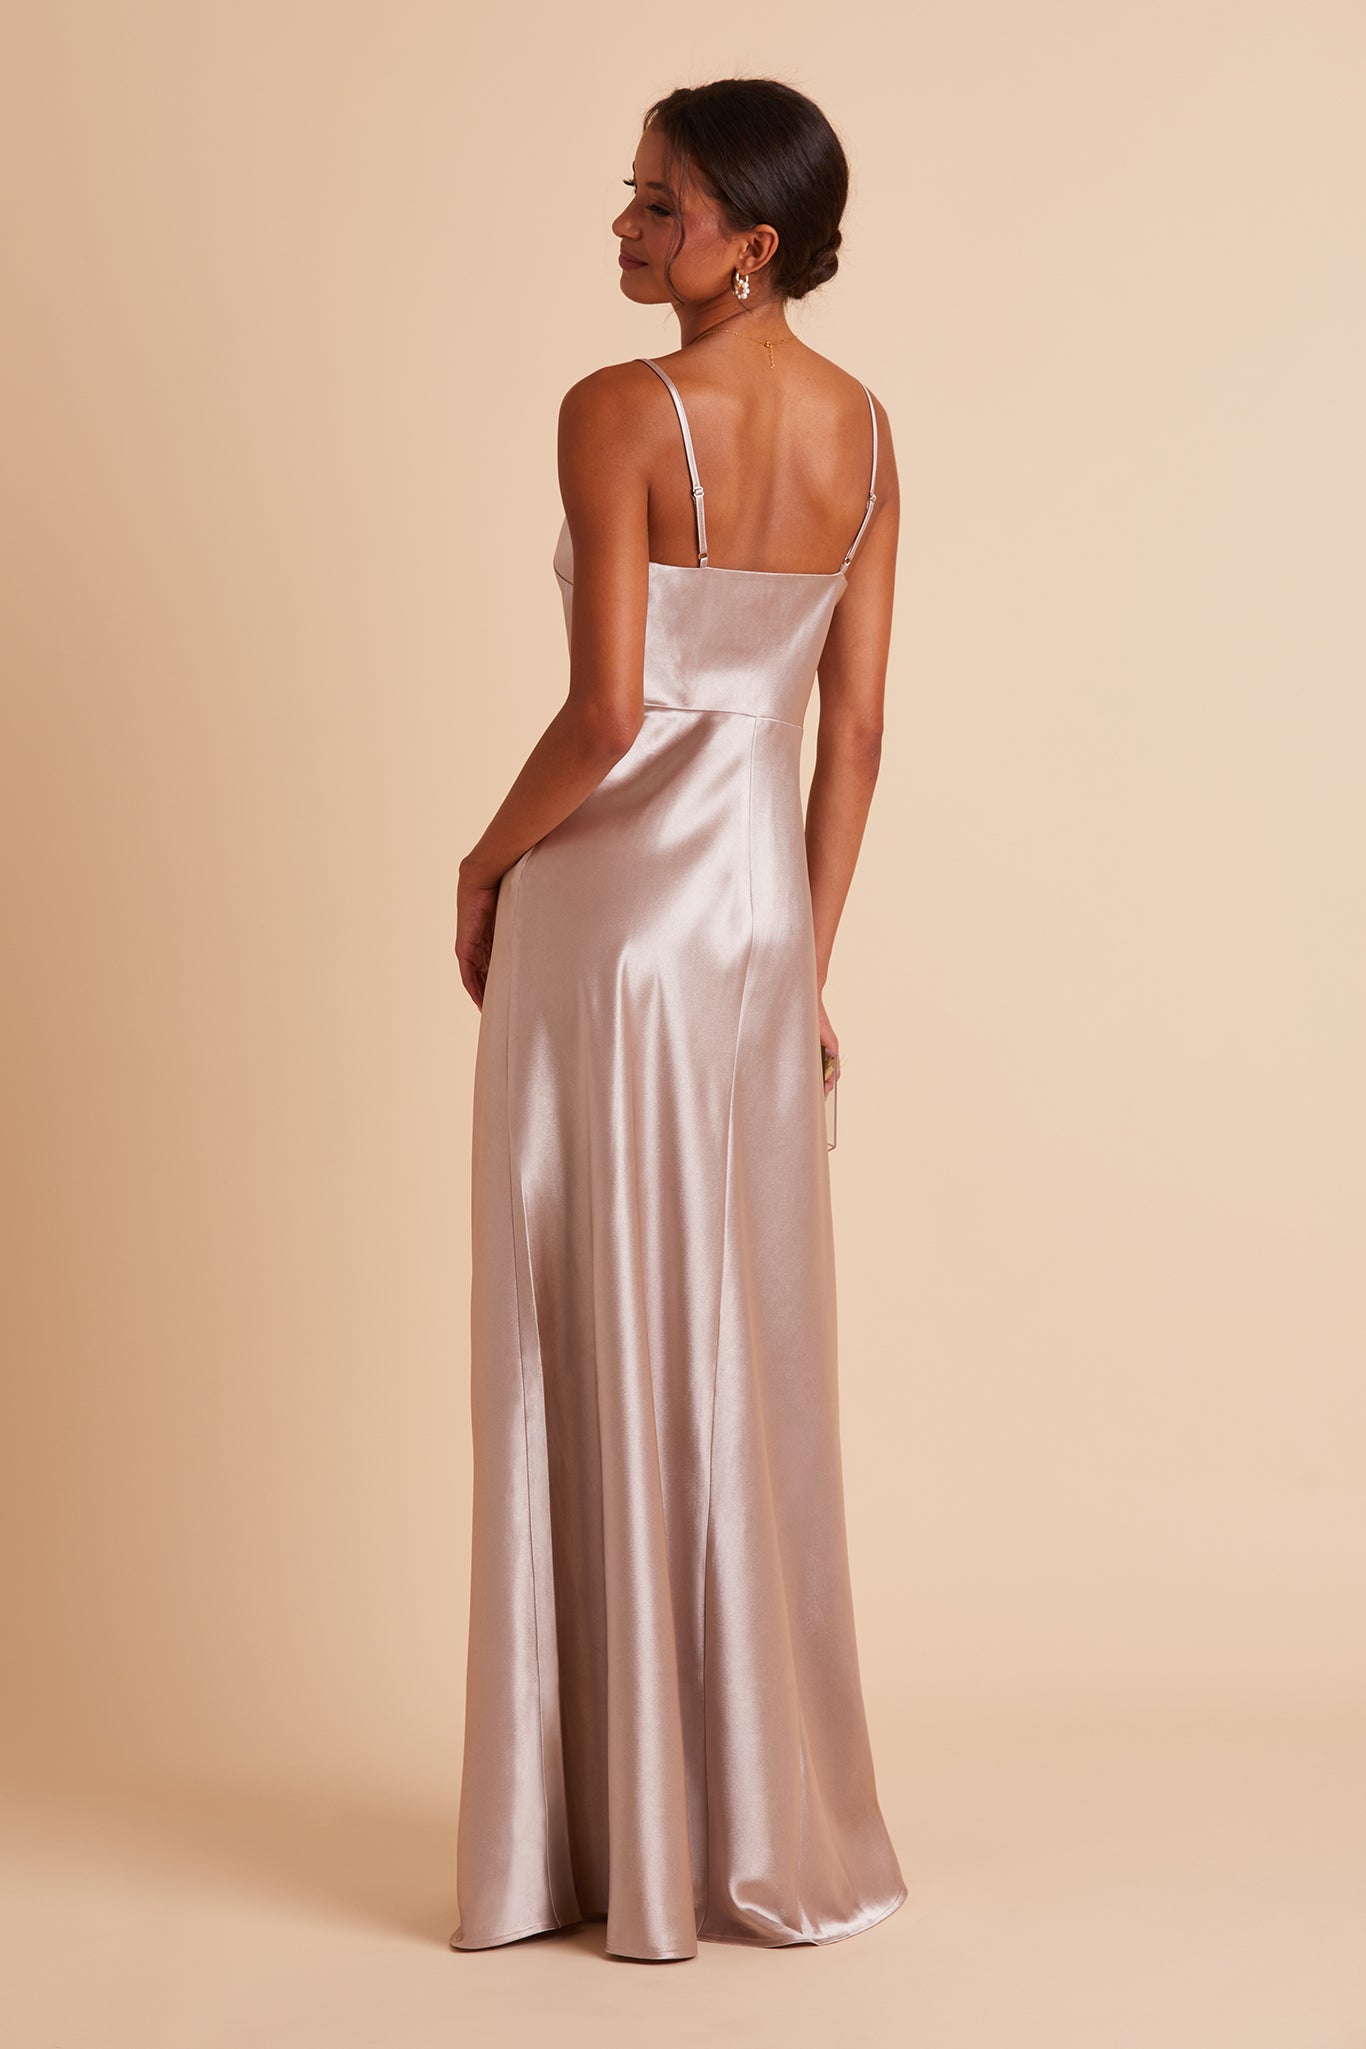 Back view of the Lisa Long Dress in taupe satin shows the back of the dress with adjustable spaghetti straps and a smooth fit in the bodice and waist that attach to a full length skirt.  